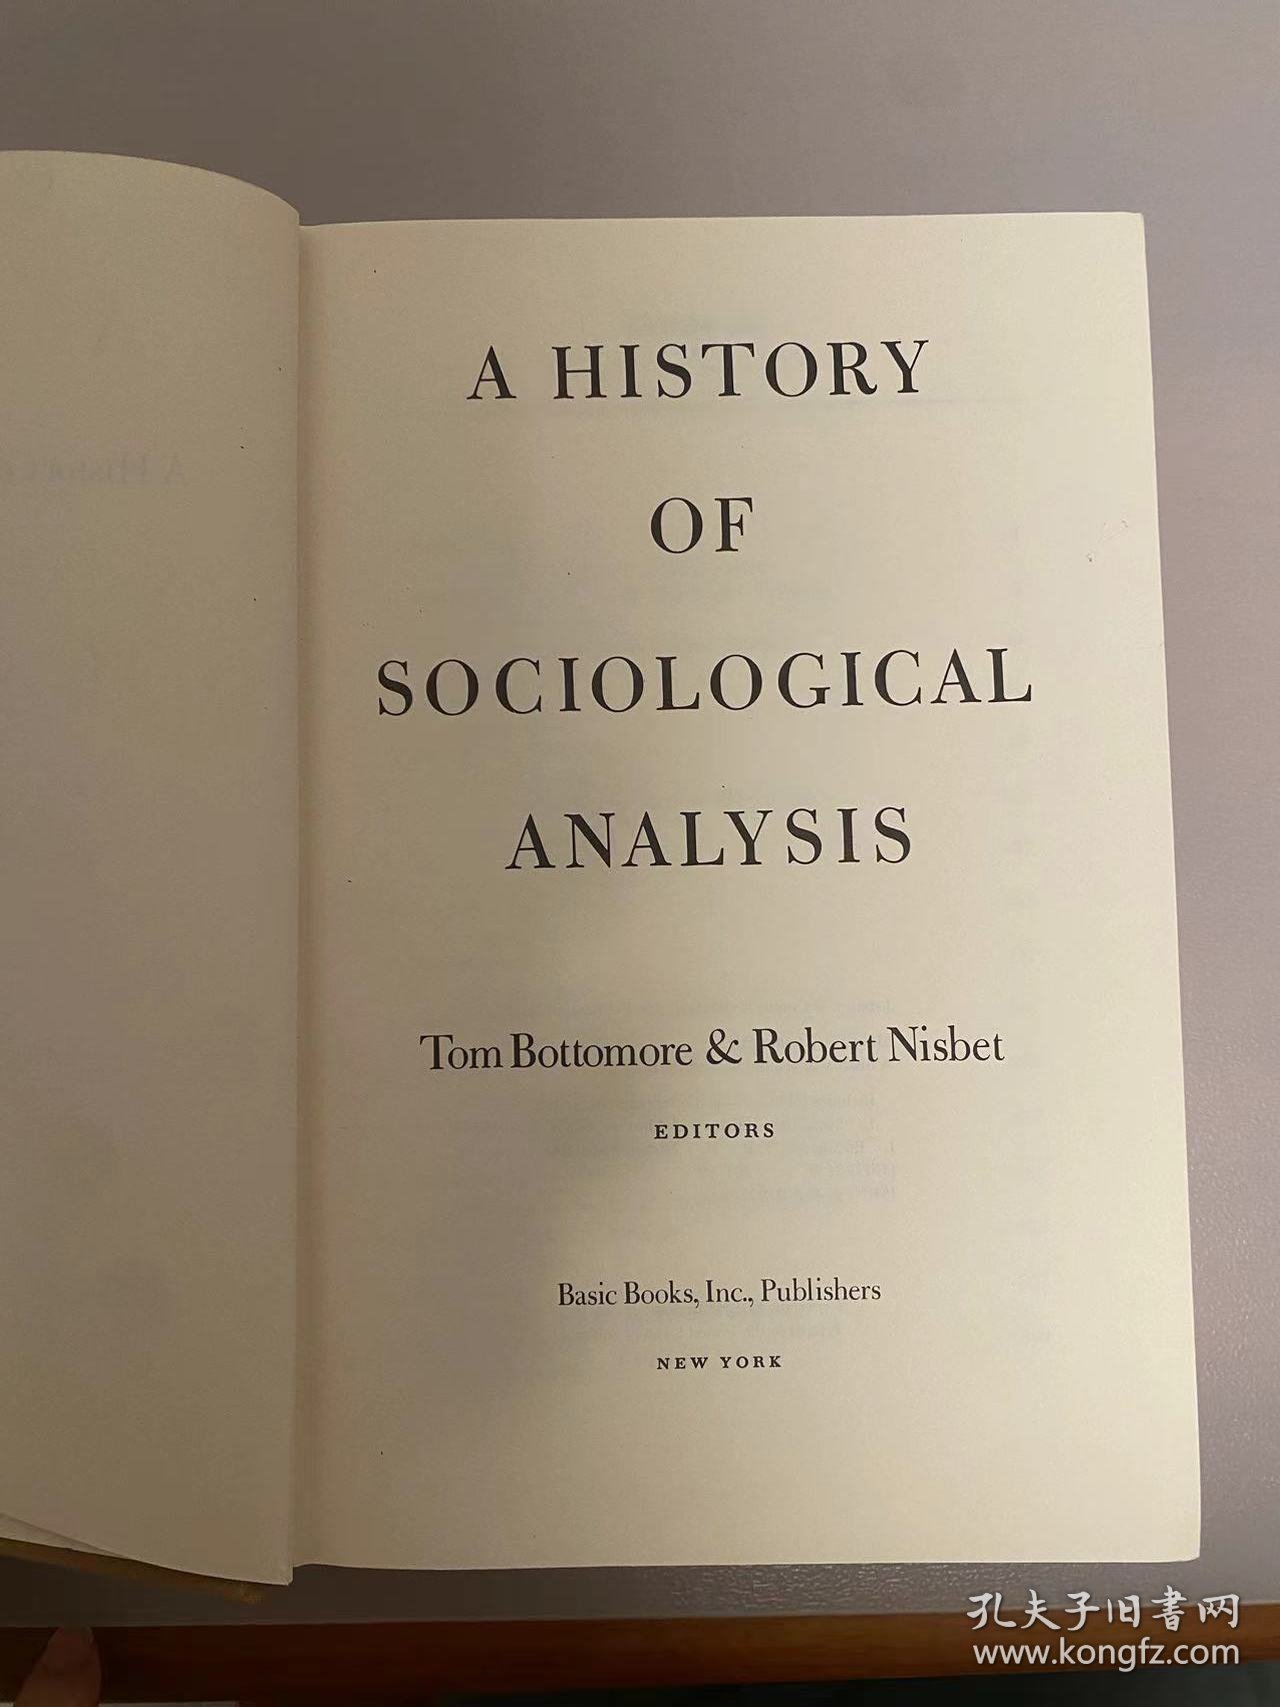 A History of Sociological Analysis